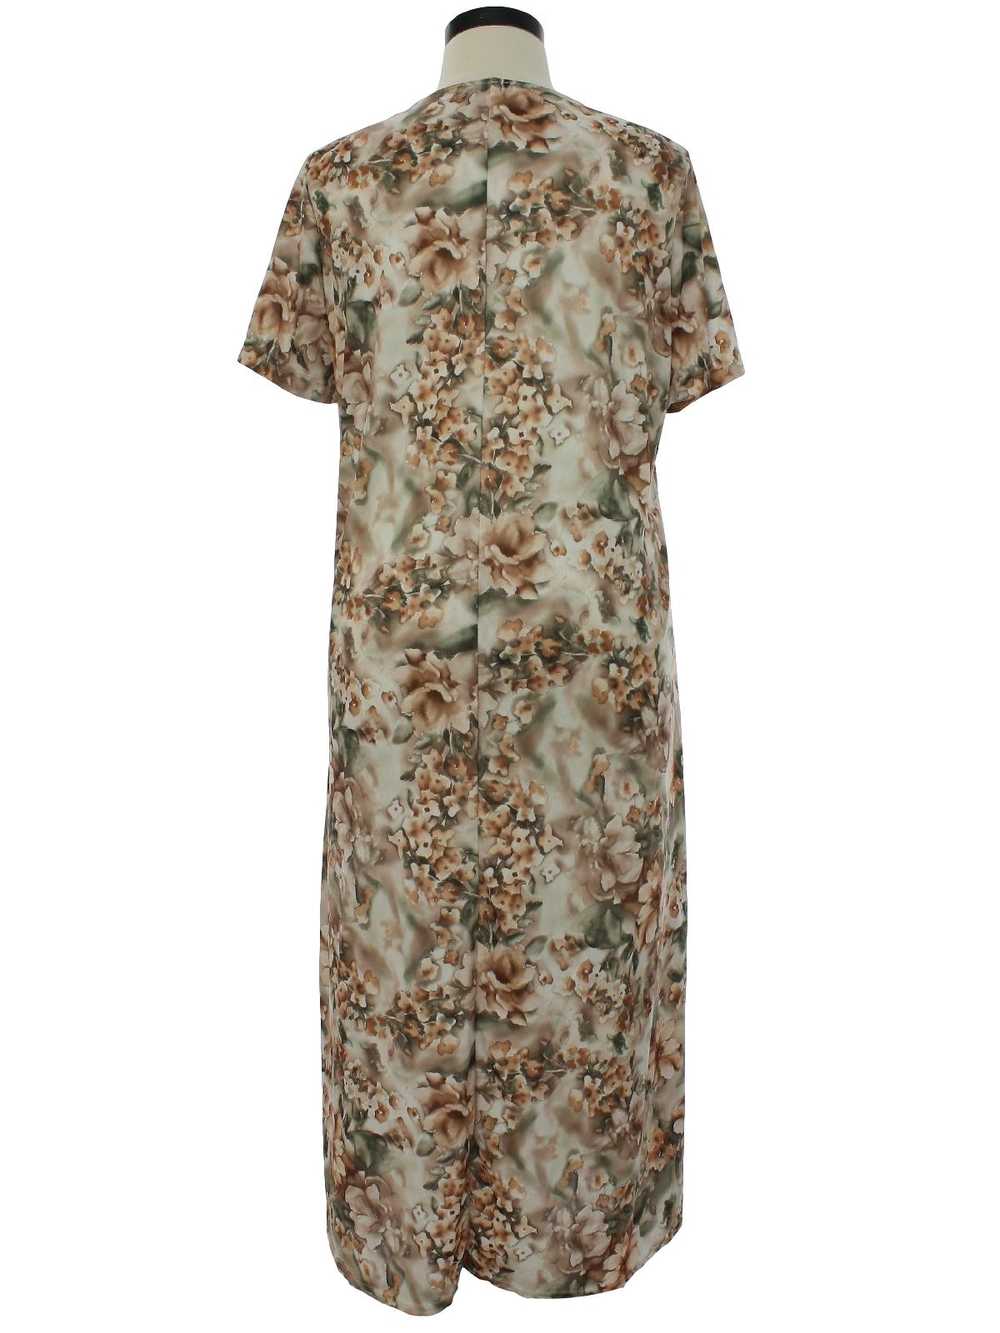 1970's LANY New York A-Line Maxi House Dress - image 3